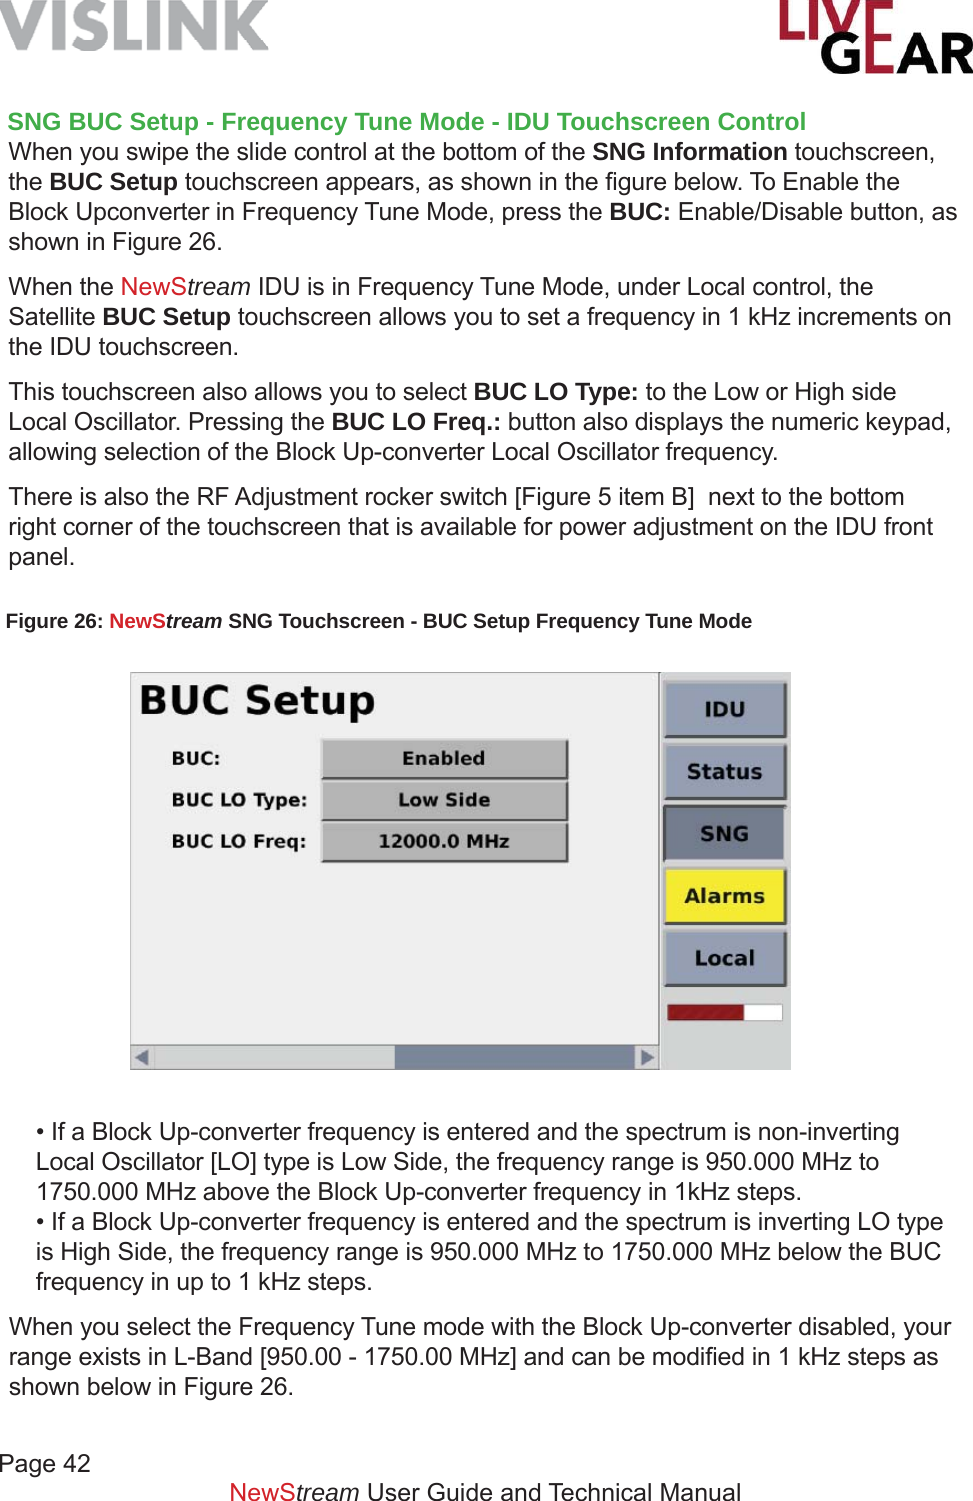 Page 42         NewStream User Guide and Technical Manual• If a Block Up-converter frequency is entered and the spectrum is non-inverting Local Oscillator [LO] type is Low Side, the frequency range is 950.000 MHz to 1750.000 MHz above the Block Up-converter frequency in 1kHz steps.• If a Block Up-converter frequency is entered and the spectrum is inverting LO type is High Side, the frequency range is 950.000 MHz to 1750.000 MHz below the BUC frequency in up to 1 kHz steps.When you select the Frequency Tune mode with the Block Up-converter disabled, your range exists in L-Band [950.00 - 1750.00 MHz] and can be modiﬁ ed in 1 kHz steps as shown below in Figure 26. Figure 26: NewStream SNG Touchscreen - BUC Setup Frequency Tune Mode SNG BUC Setup - Frequency Tune Mode - IDU Touchscreen ControlWhen you swipe the slide control at the bottom of the SNG Information touchscreen, the BUC Setup touchscreen appears, as shown in the ﬁ gure below. To Enable the Block Upconverter in Frequency Tune Mode, press the BUC: Enable/Disable button, as shown in Figure 26.When the NewStream IDU is in Frequency Tune Mode, under Local control, the Satellite BUC Setup touchscreen allows you to set a frequency in 1 kHz increments on the IDU touchscreen.  This touchscreen also allows you to select BUC LO Type: to the Low or High side Local Oscillator. Pressing the BUC LO Freq.: button also displays the numeric keypad, allowing selection of the Block Up-converter Local Oscillator frequency. There is also the RF Adjustment rocker switch [Figure 5 item B]  next to the bottom right corner of the touchscreen that is available for power adjustment on the IDU front panel.